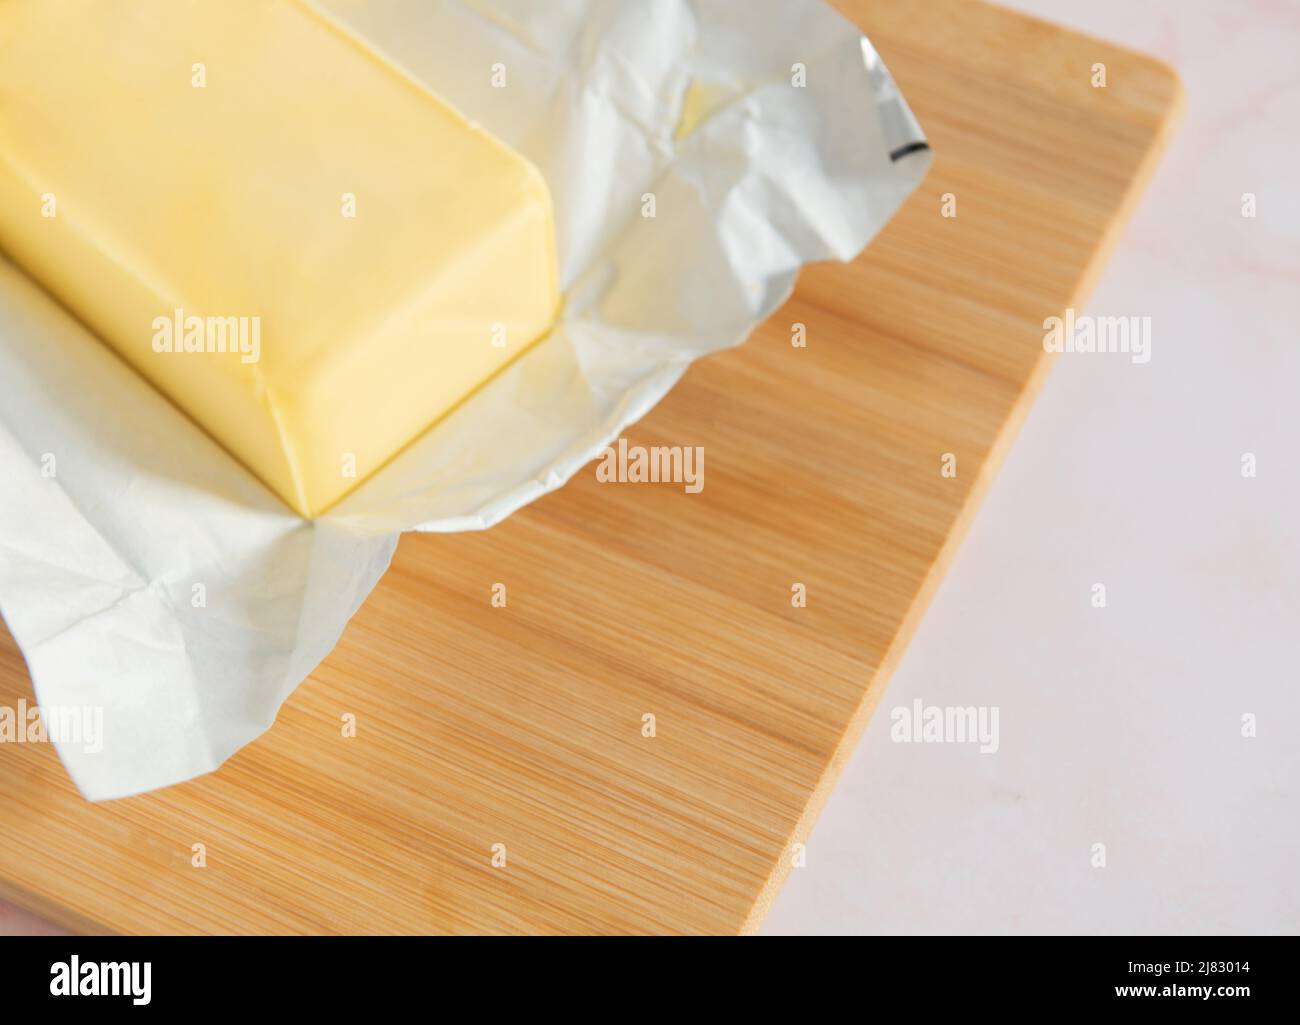 Cutting board with a block of butter unwrapped Stock Photo